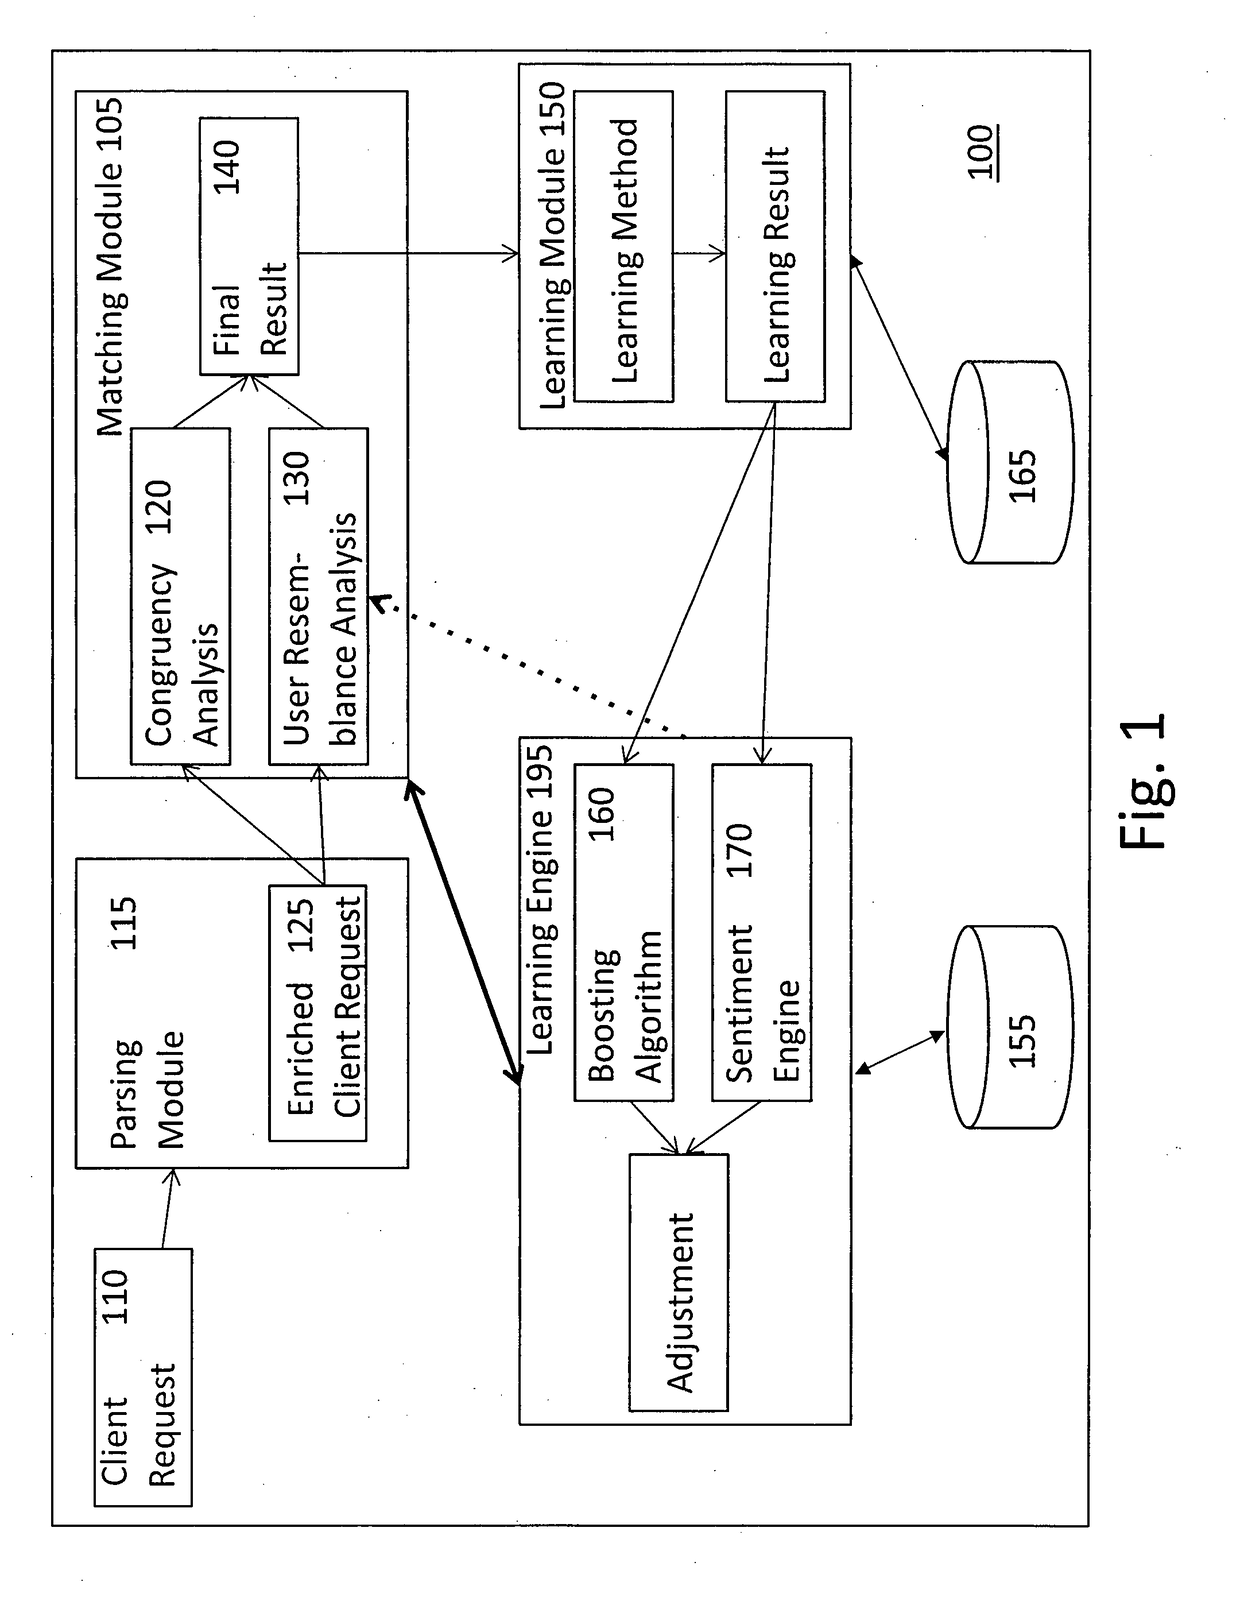 Adaptive adjustment of network responses to client requests in digital networks